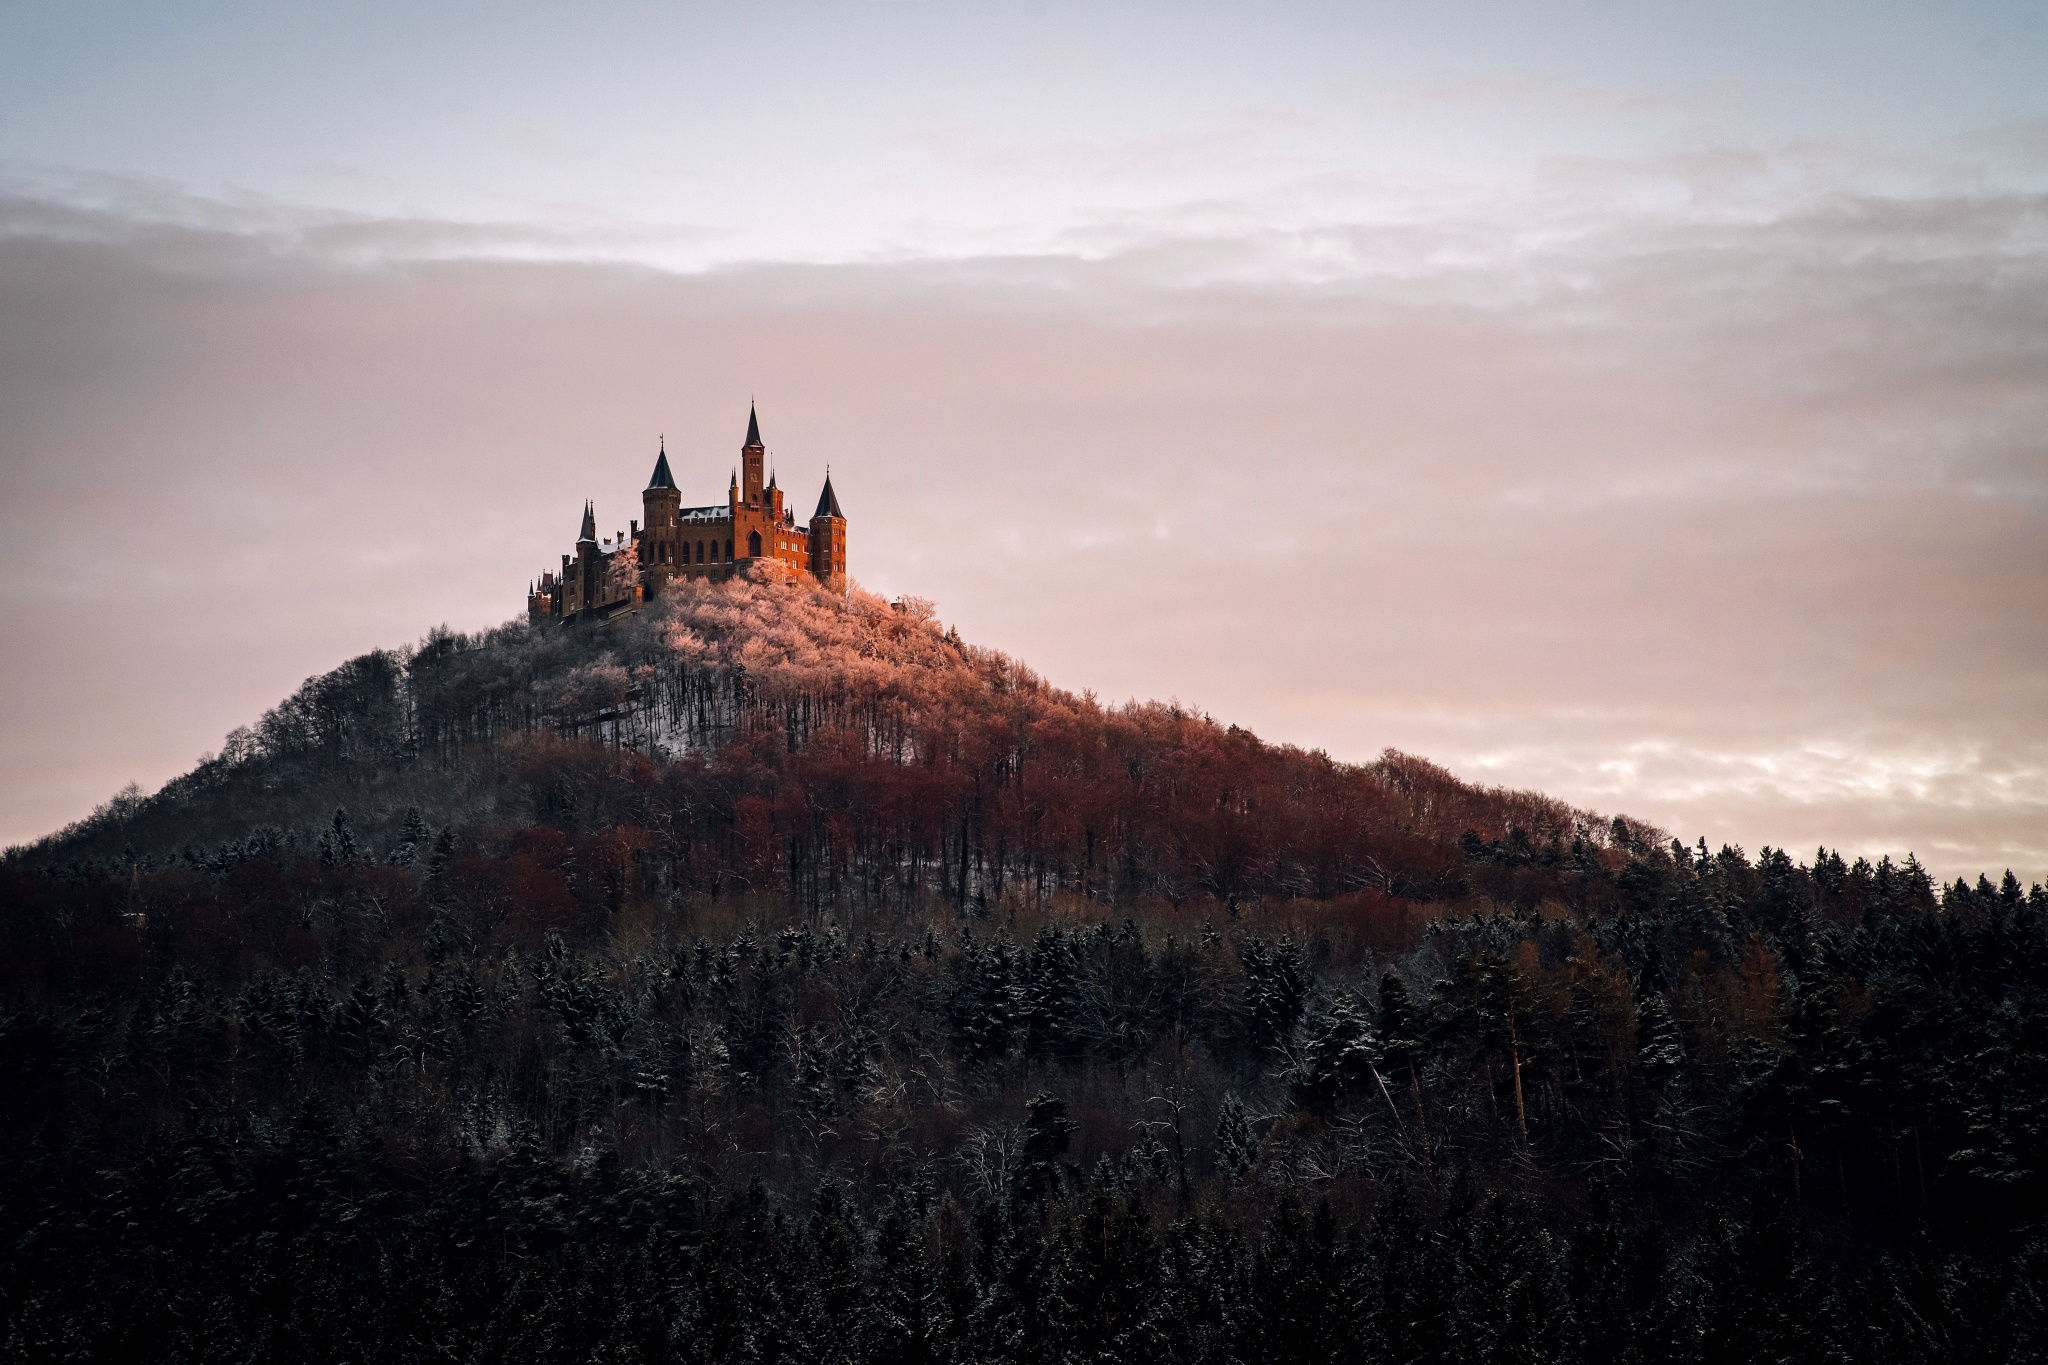 man made, hohenzollern castle, castle, forest, germany, hill, castles